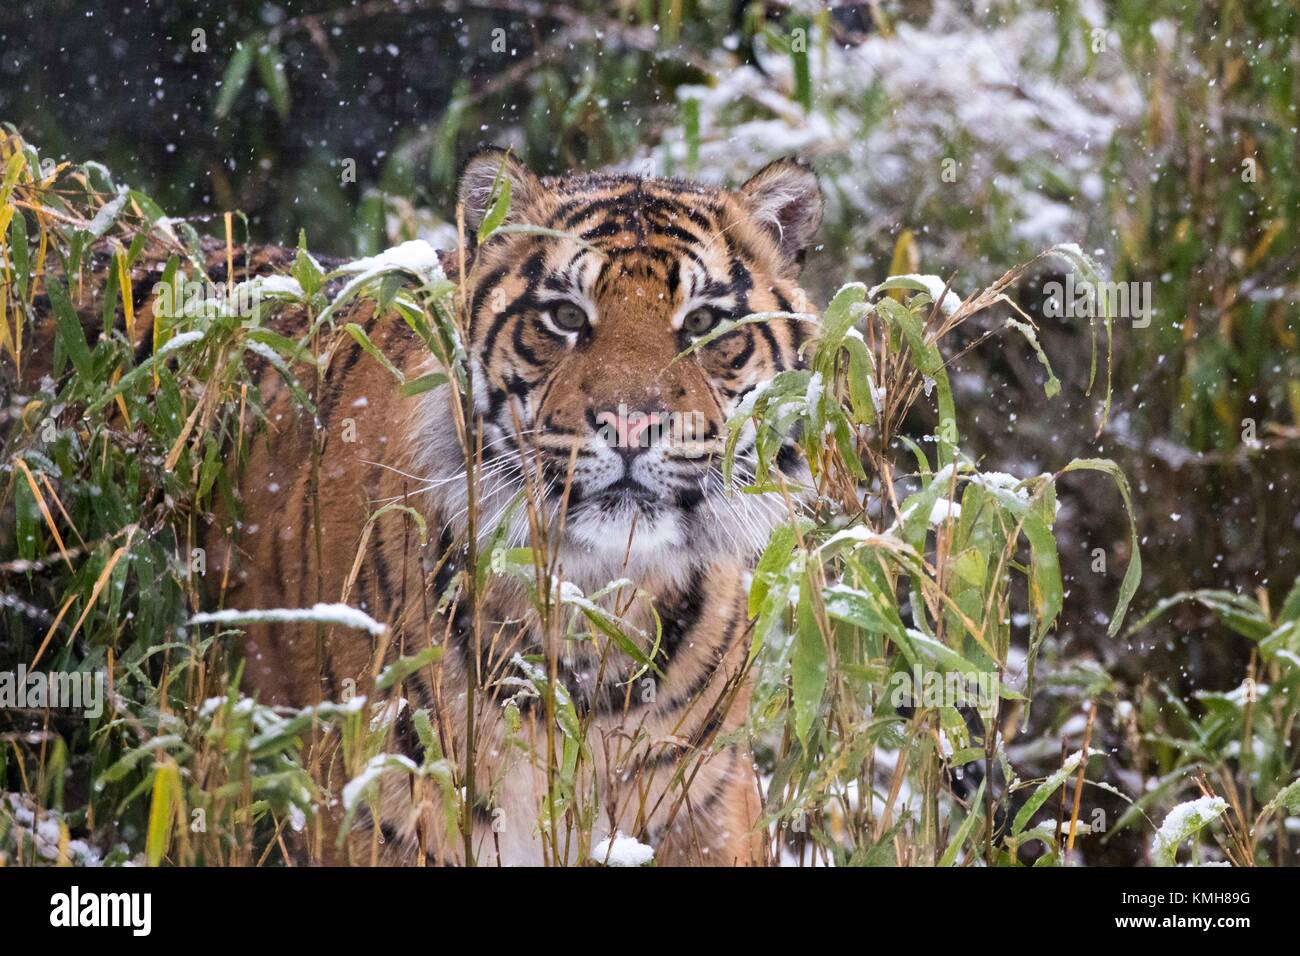 London, UK. 10th Dec, 2017. Sumatran tiger Achilles stands in the snow at ZSL (Zoological Society of London) London Zoo in London, Britain on Dec. 10, 2017. Credit: ZSL London Zoo/Xinhua/Alamy Live News Stock Photo